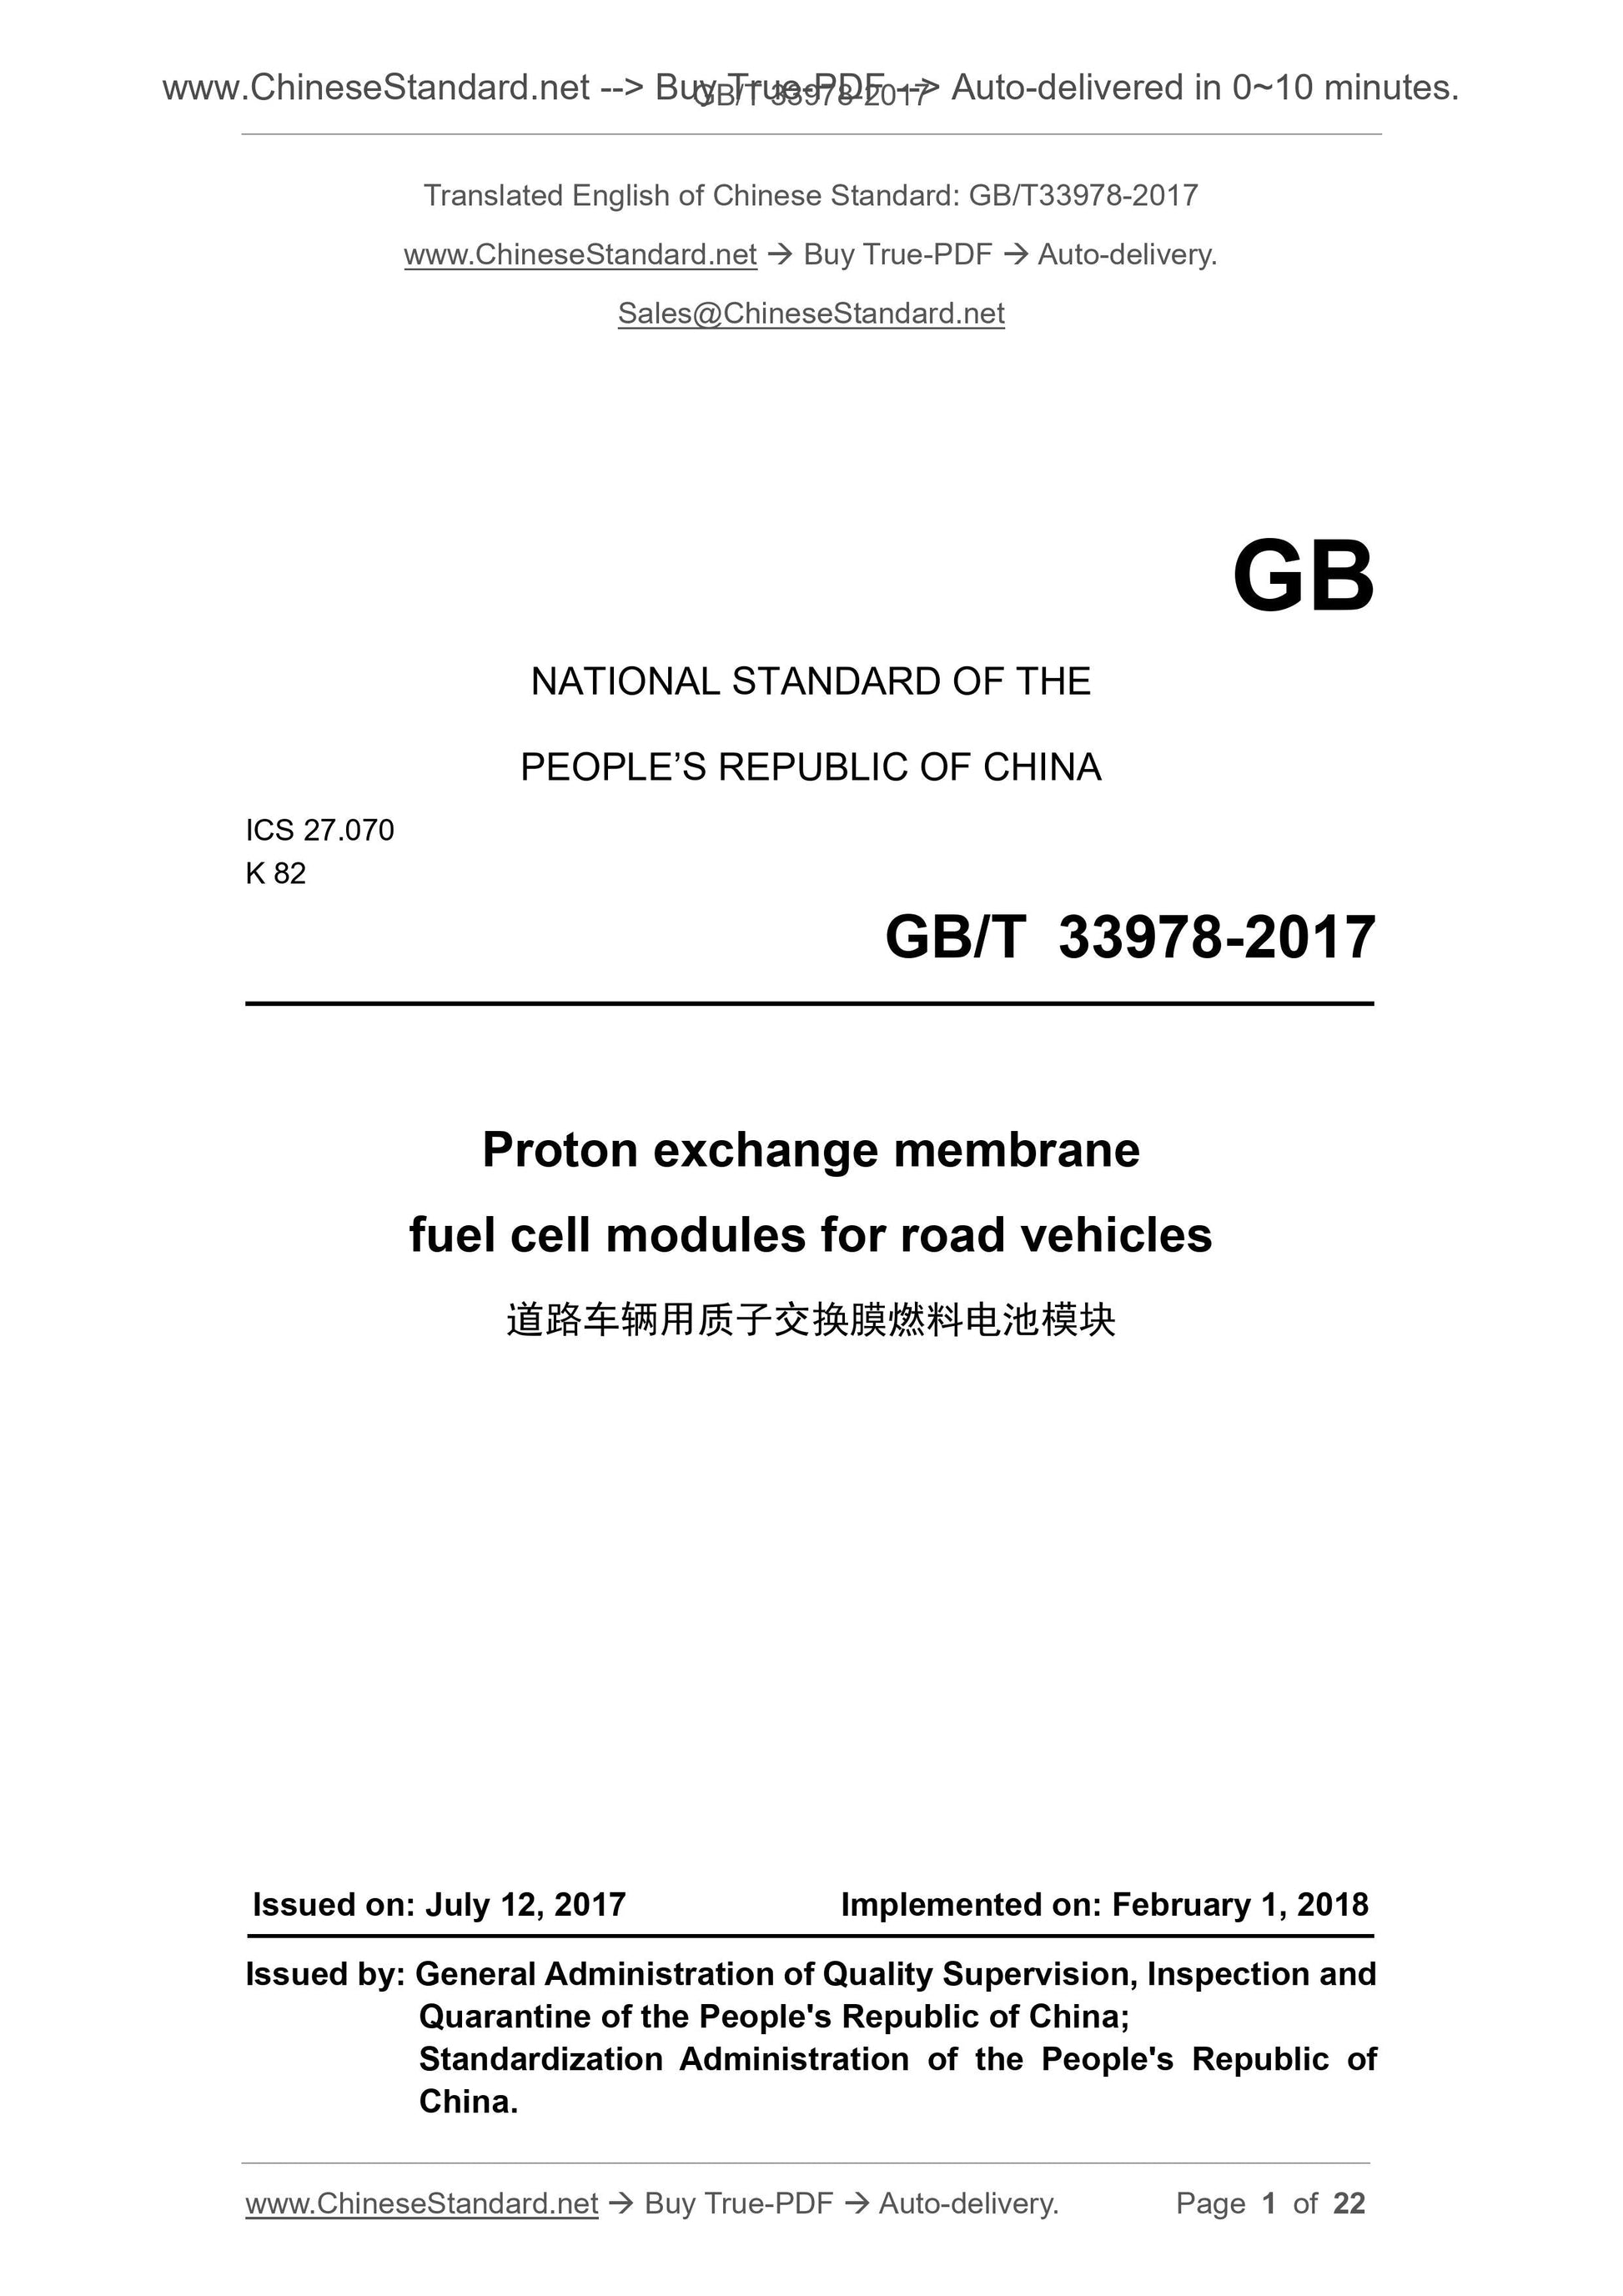 GB/T 33978-2017 Page 1